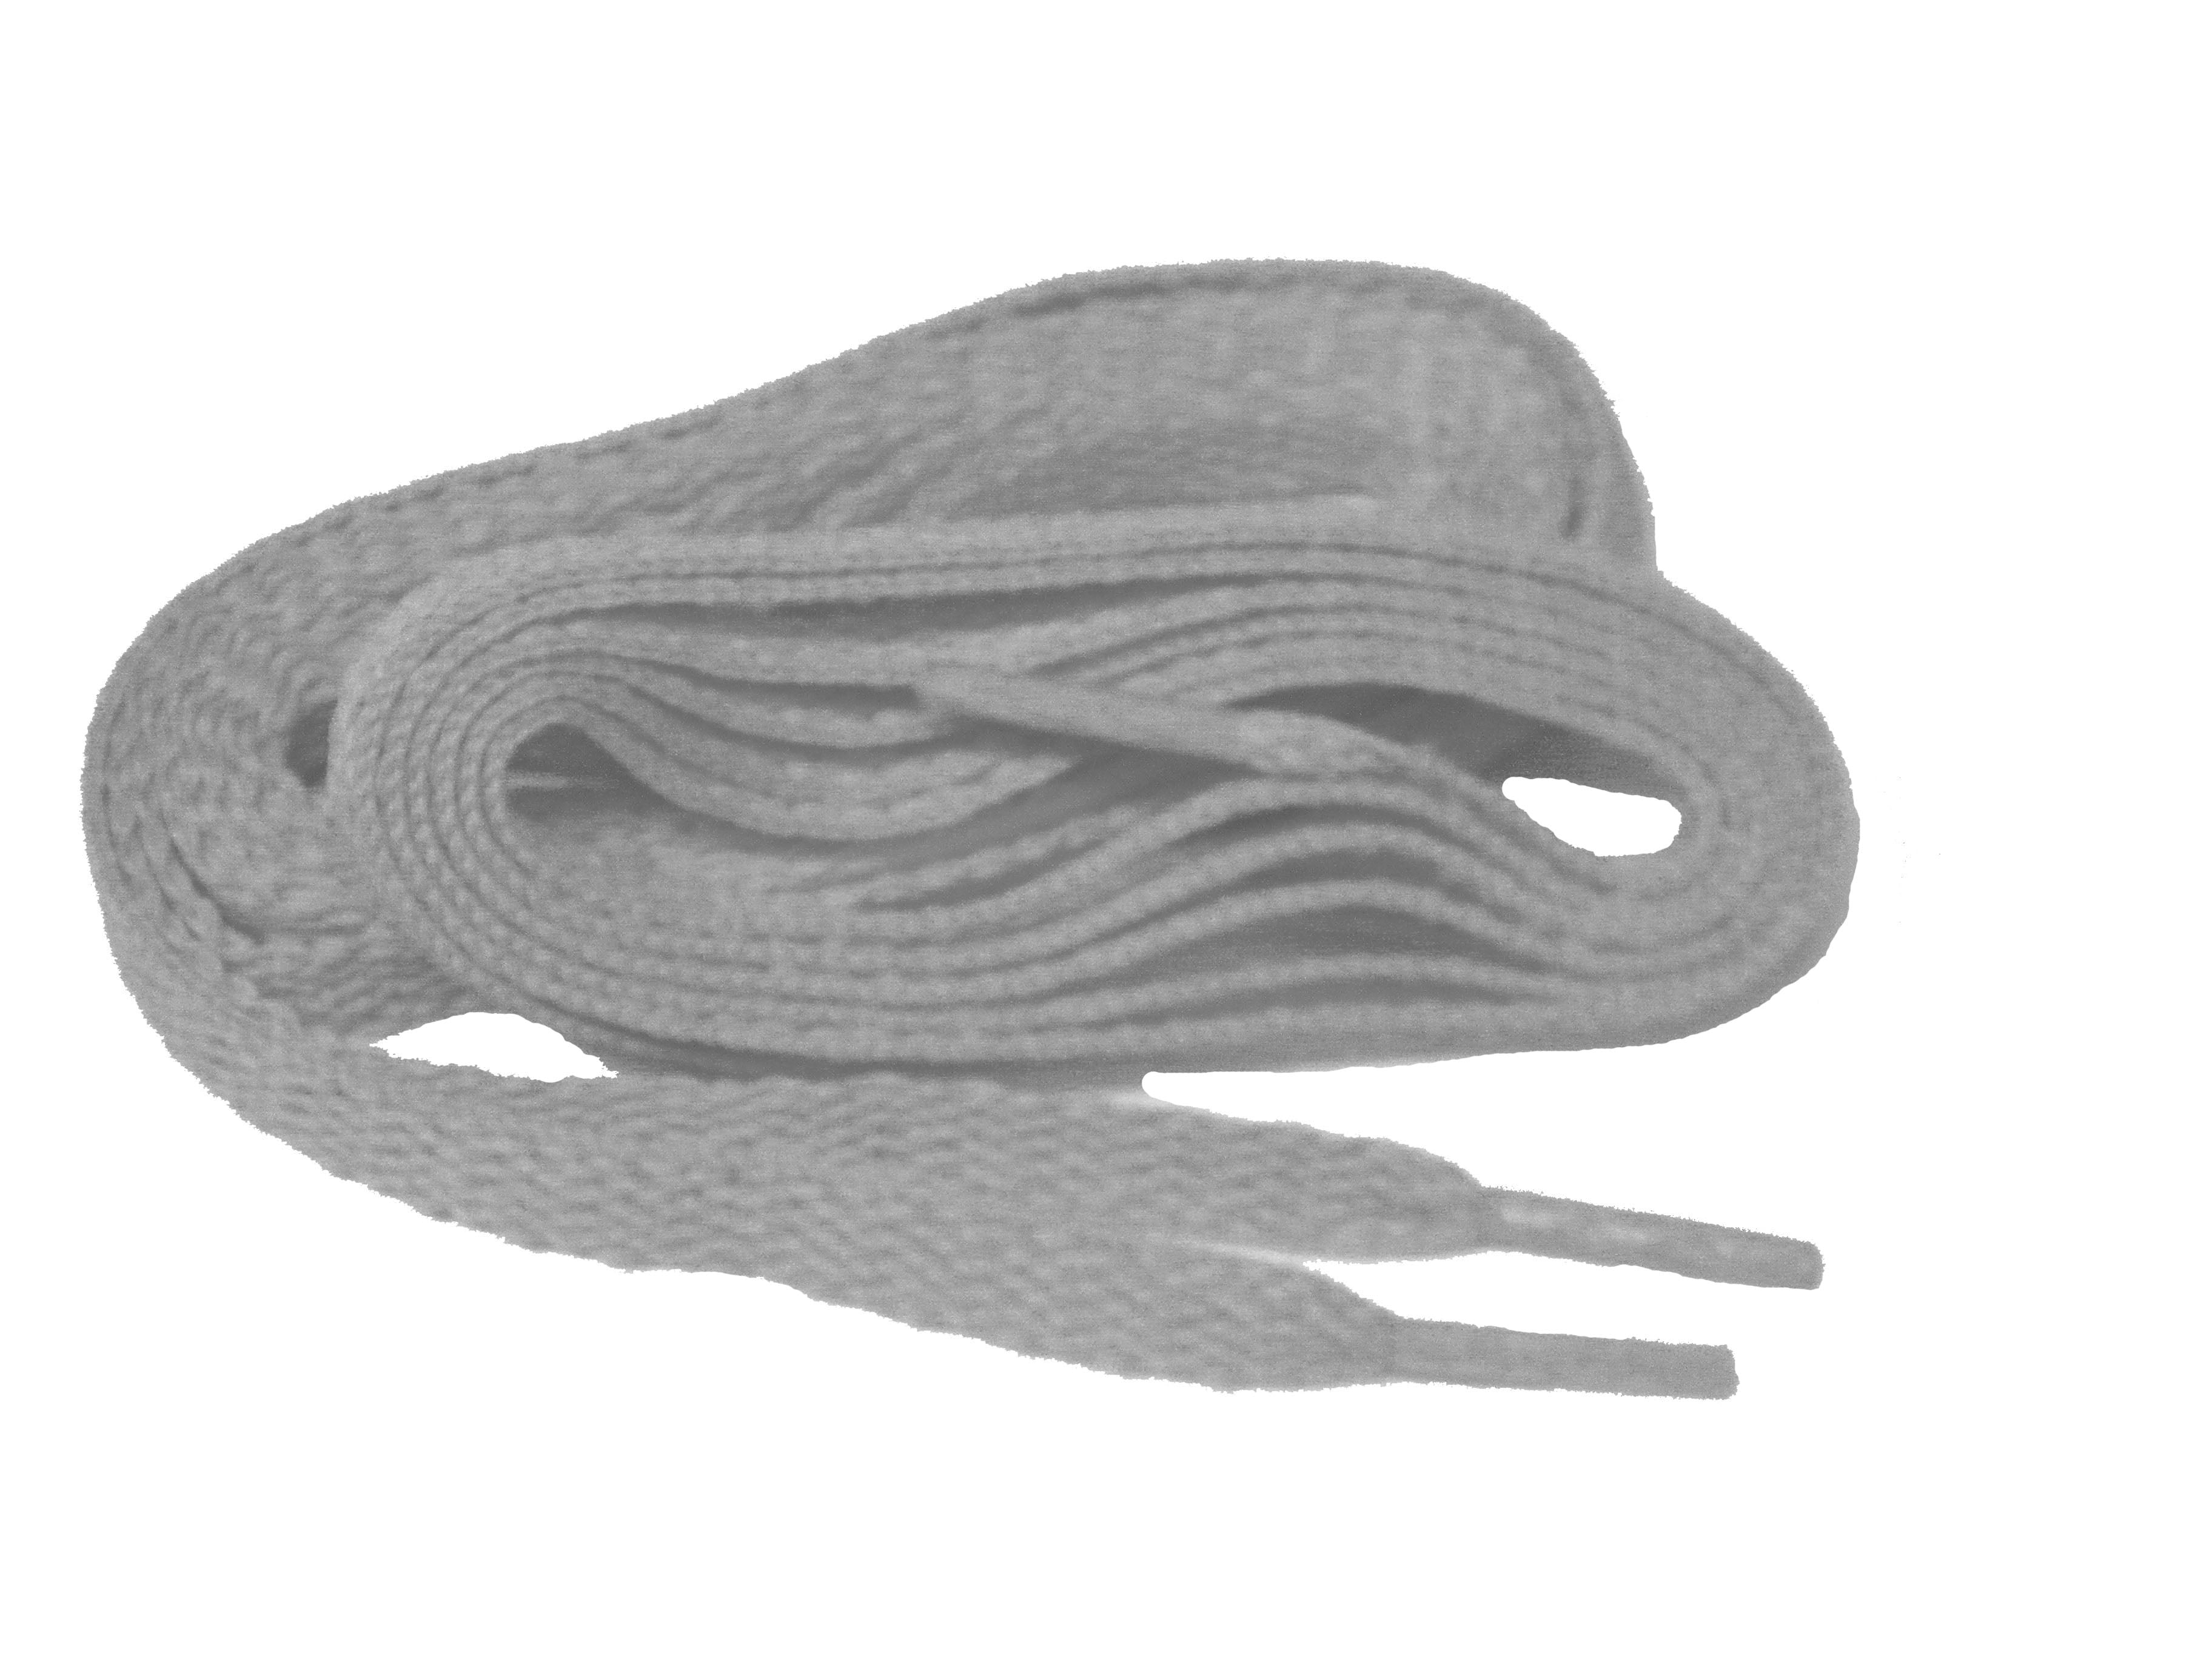 Thick Rope Shoelaces 5/16 Inch: white, black, beige, pink, blue, yellow